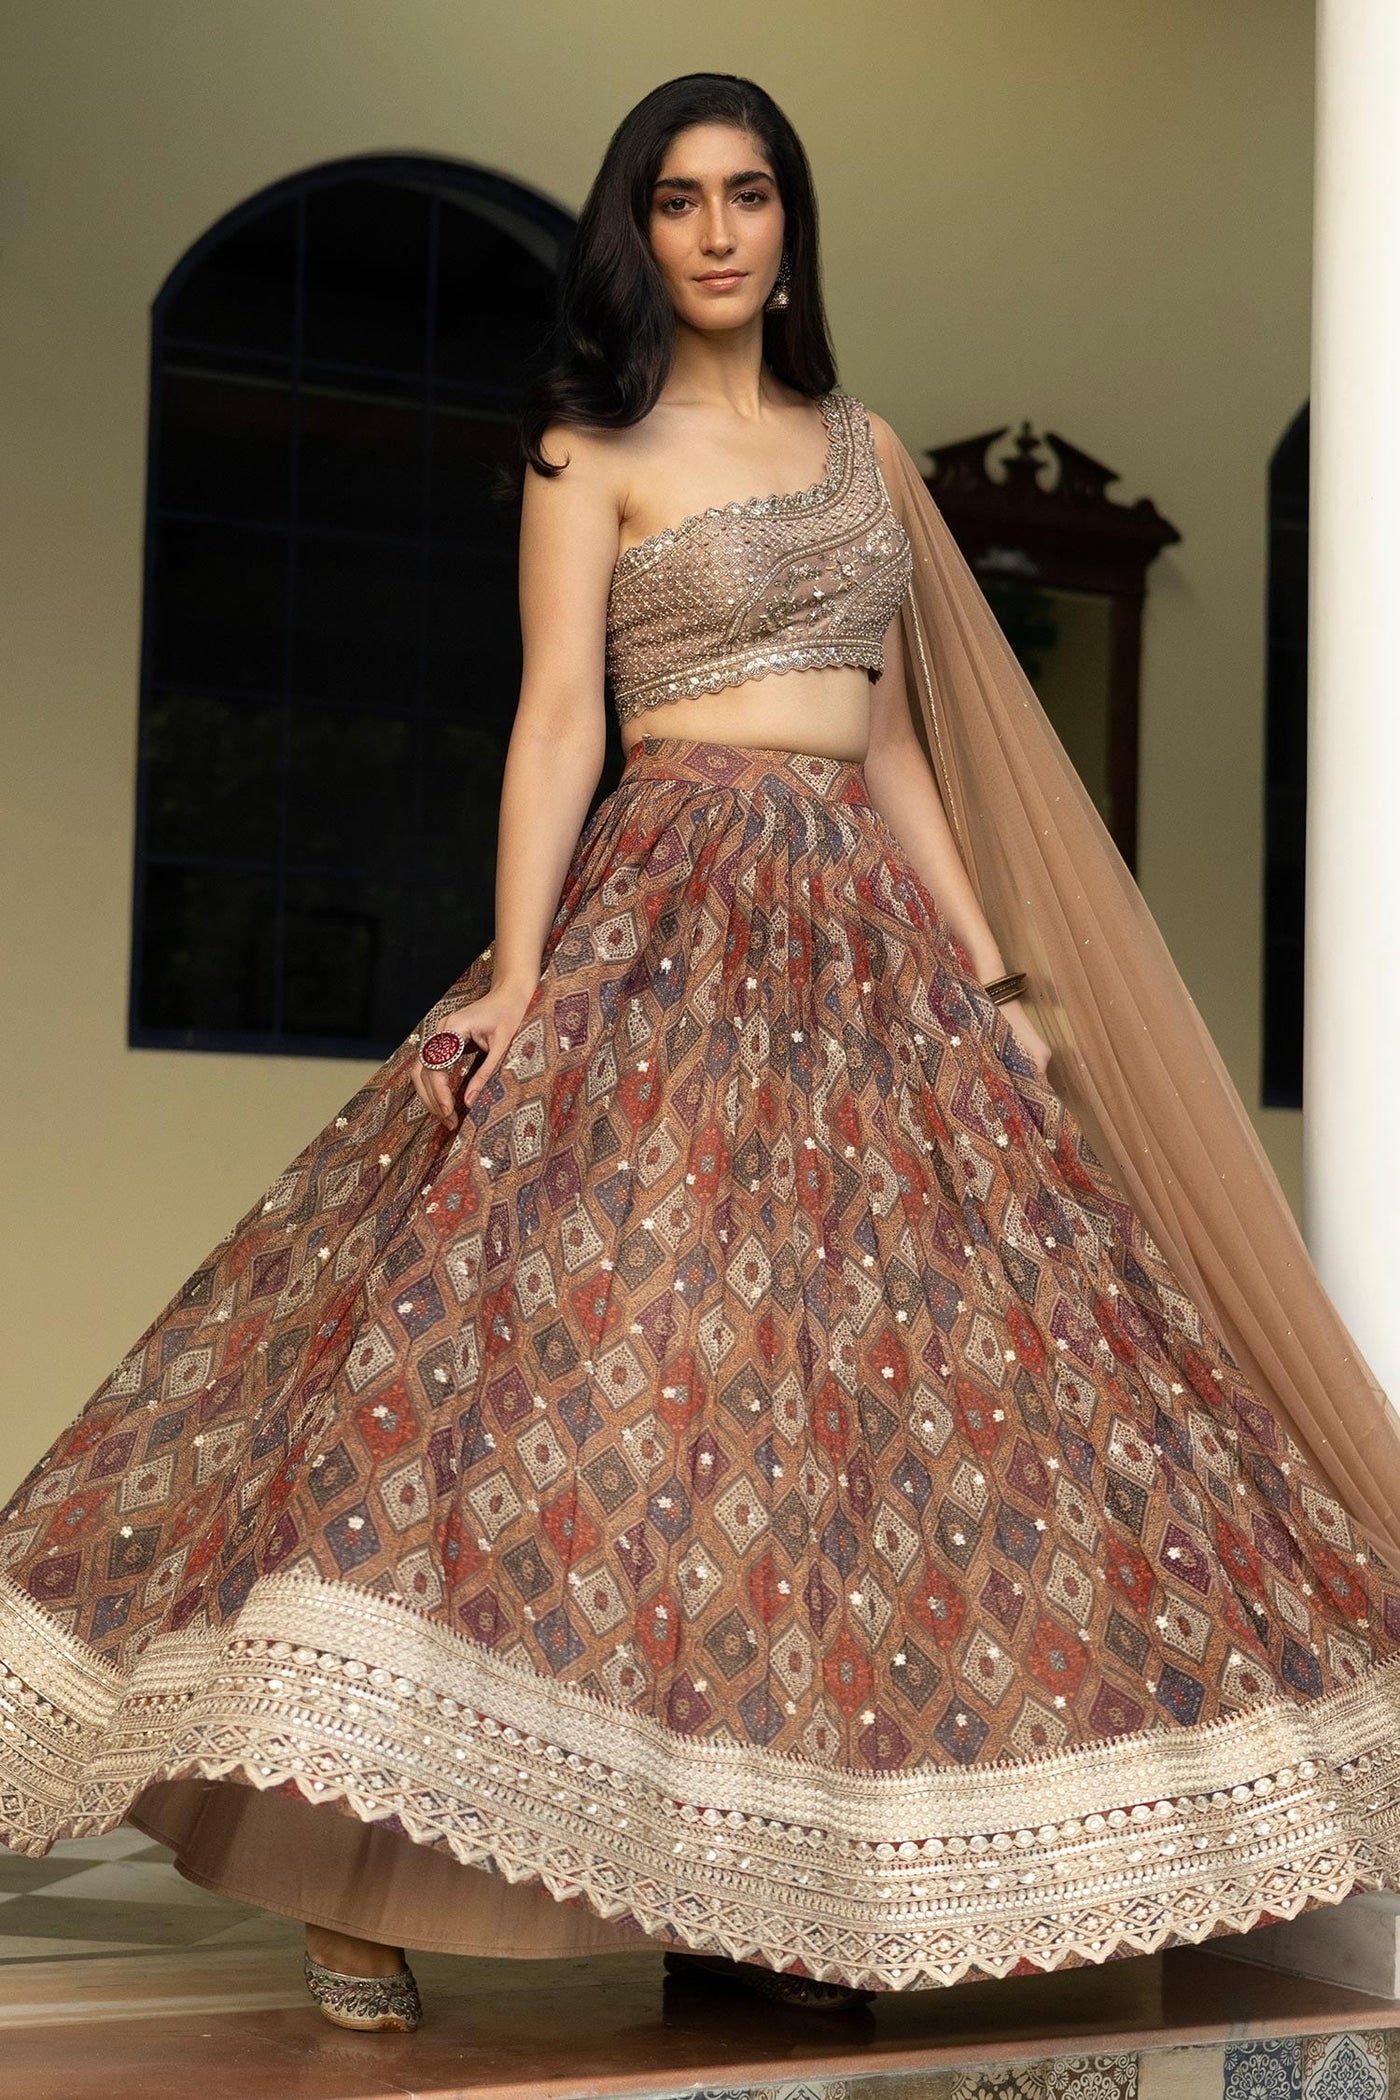 One-Shoulder Lehenga Set - Indian Clothing in Denver, CO, Aurora, CO, Boulder, CO, Fort Collins, CO, Colorado Springs, CO, Parker, CO, Highlands Ranch, CO, Cherry Creek, CO, Centennial, CO, and Longmont, CO. Nationwide shipping USA - India Fashion X